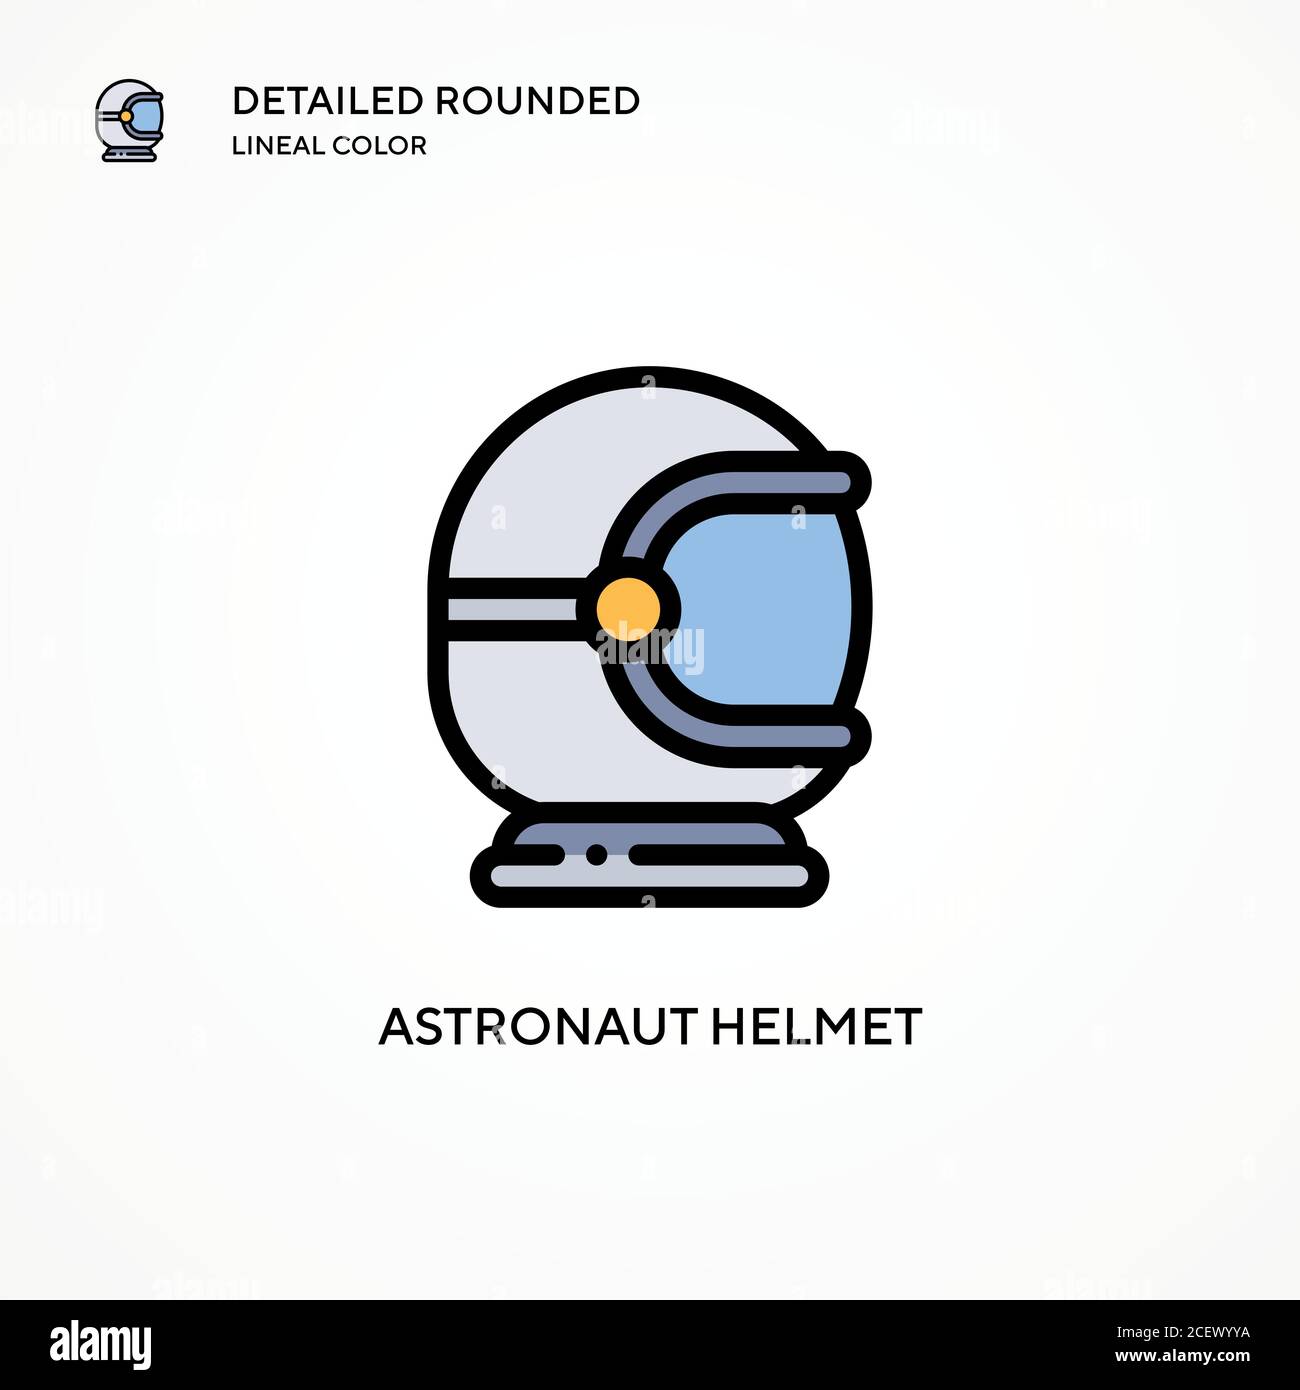 Astronaut helmet vector icon. Modern vector illustration concepts. Easy to edit and customize. Stock Vector